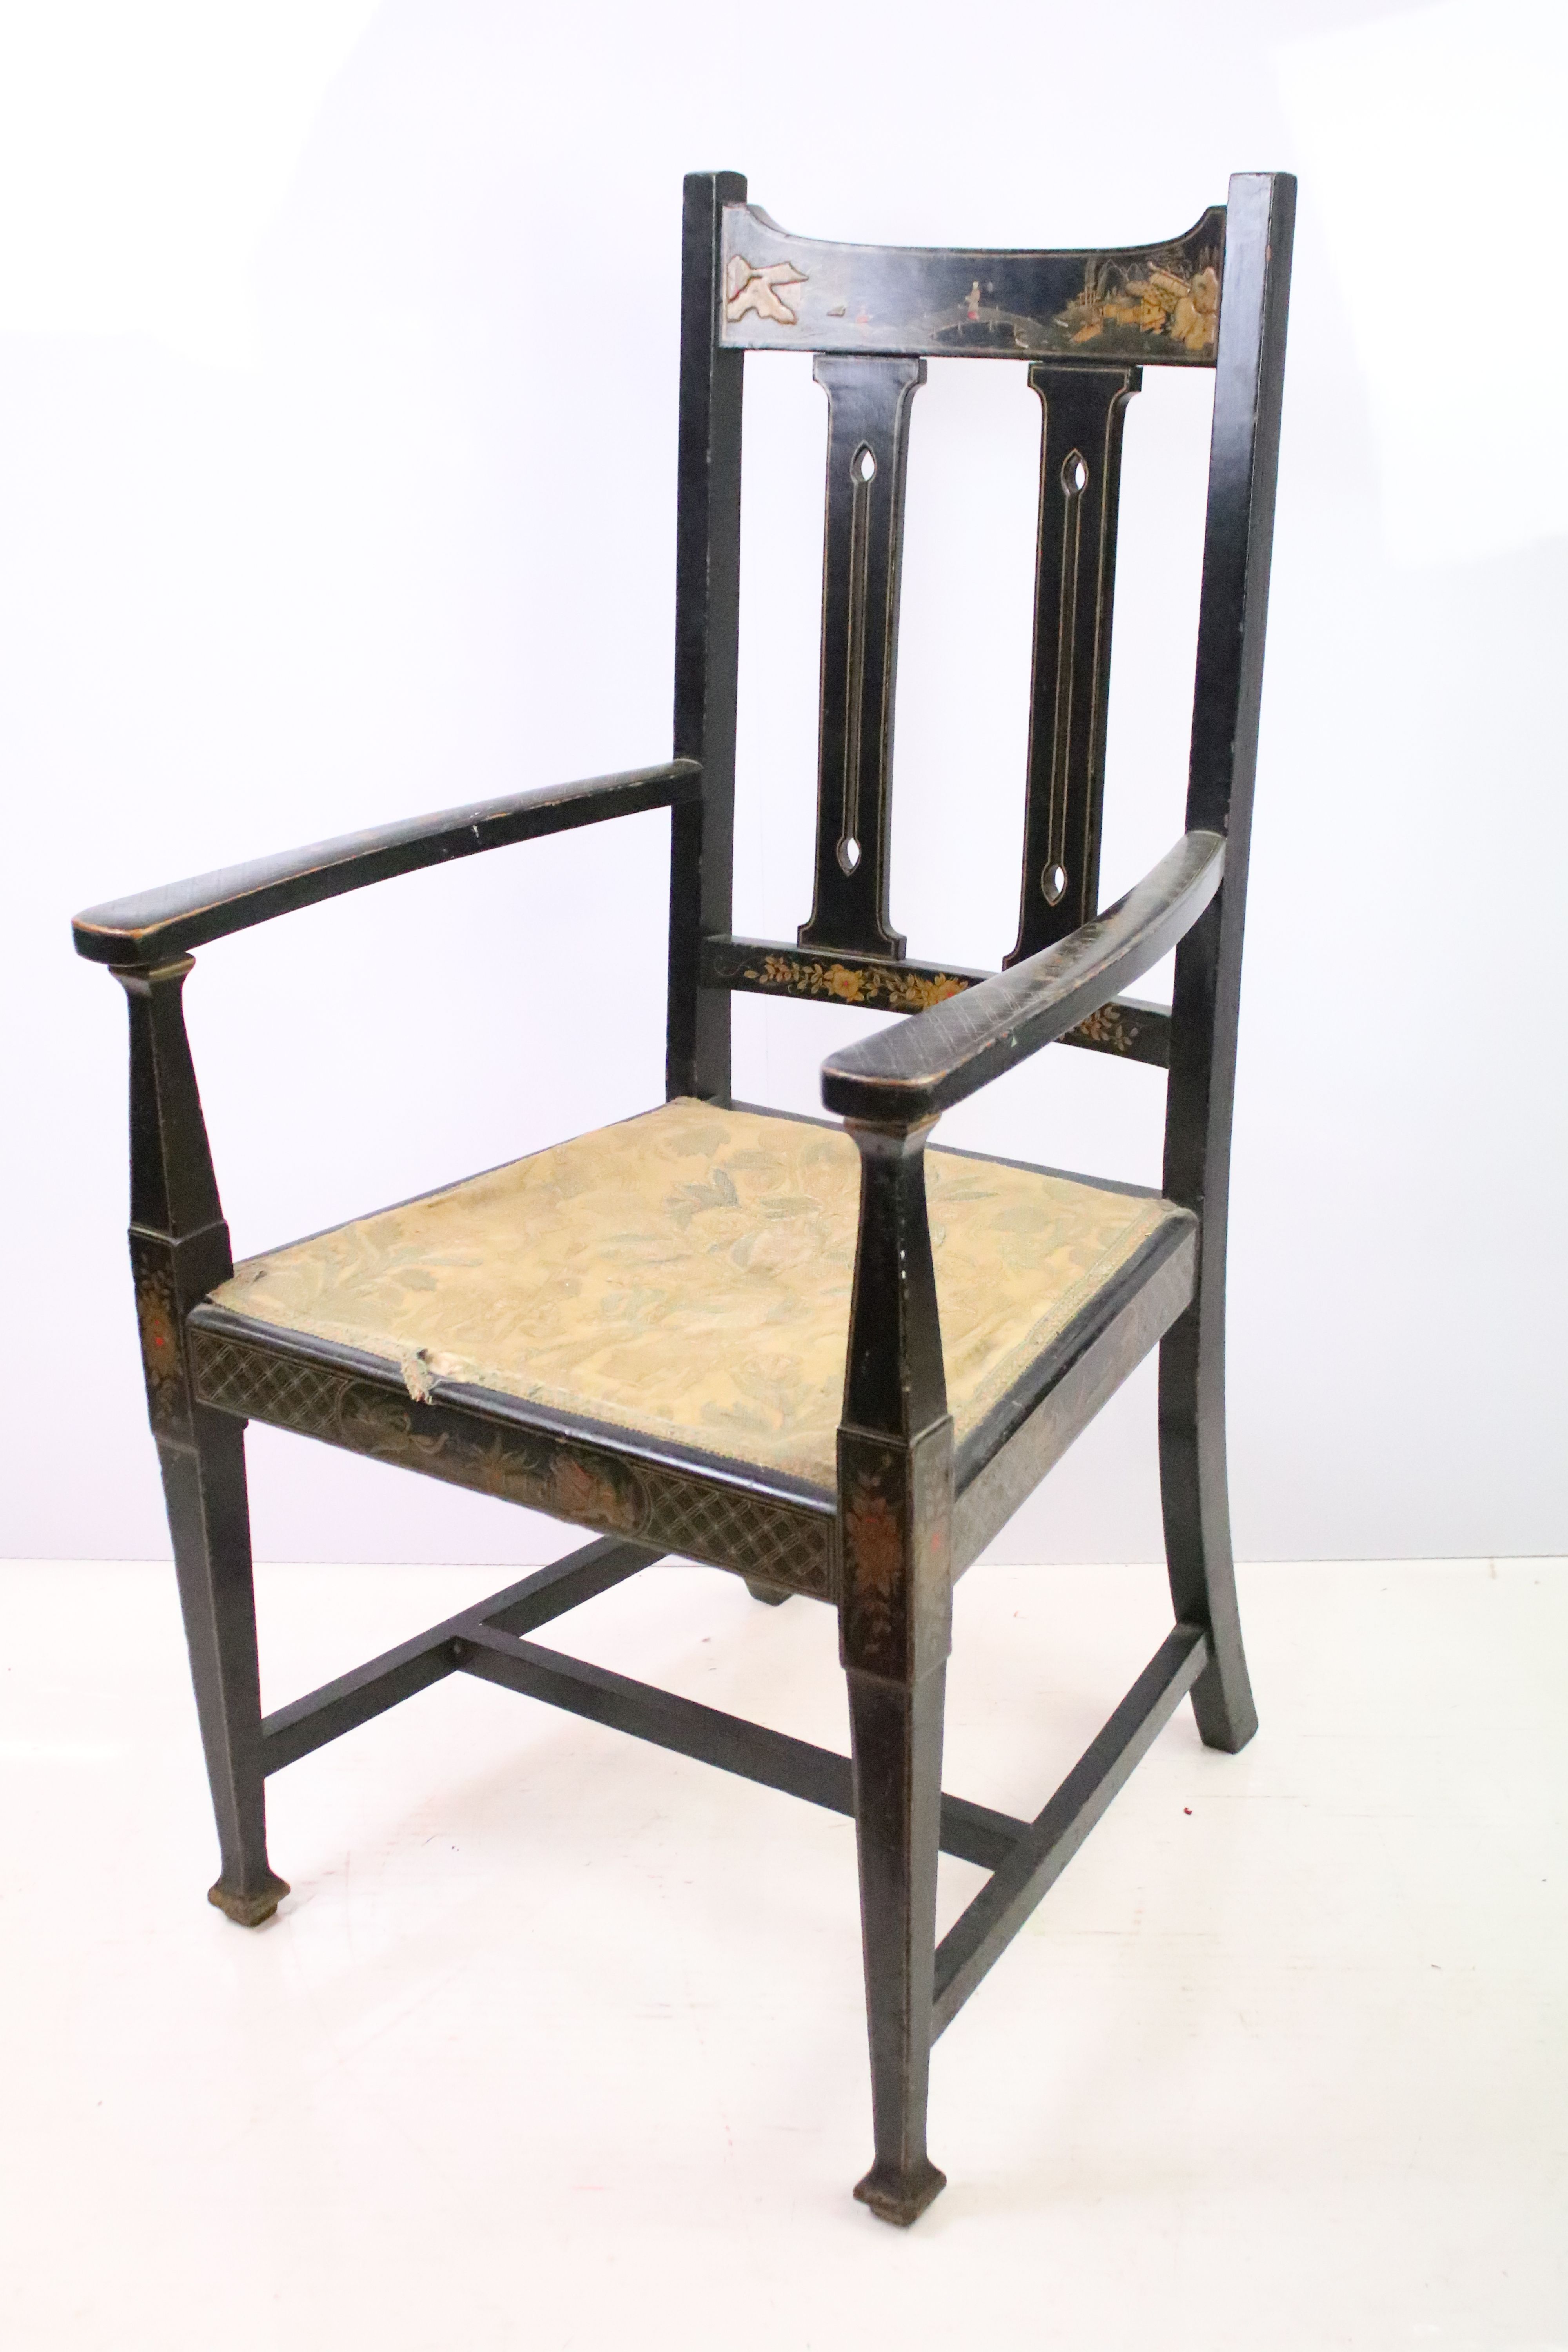 19th century Oriental japanned chair, decorated with painted panels, 111.5cm high x 60cm wide x 59cm